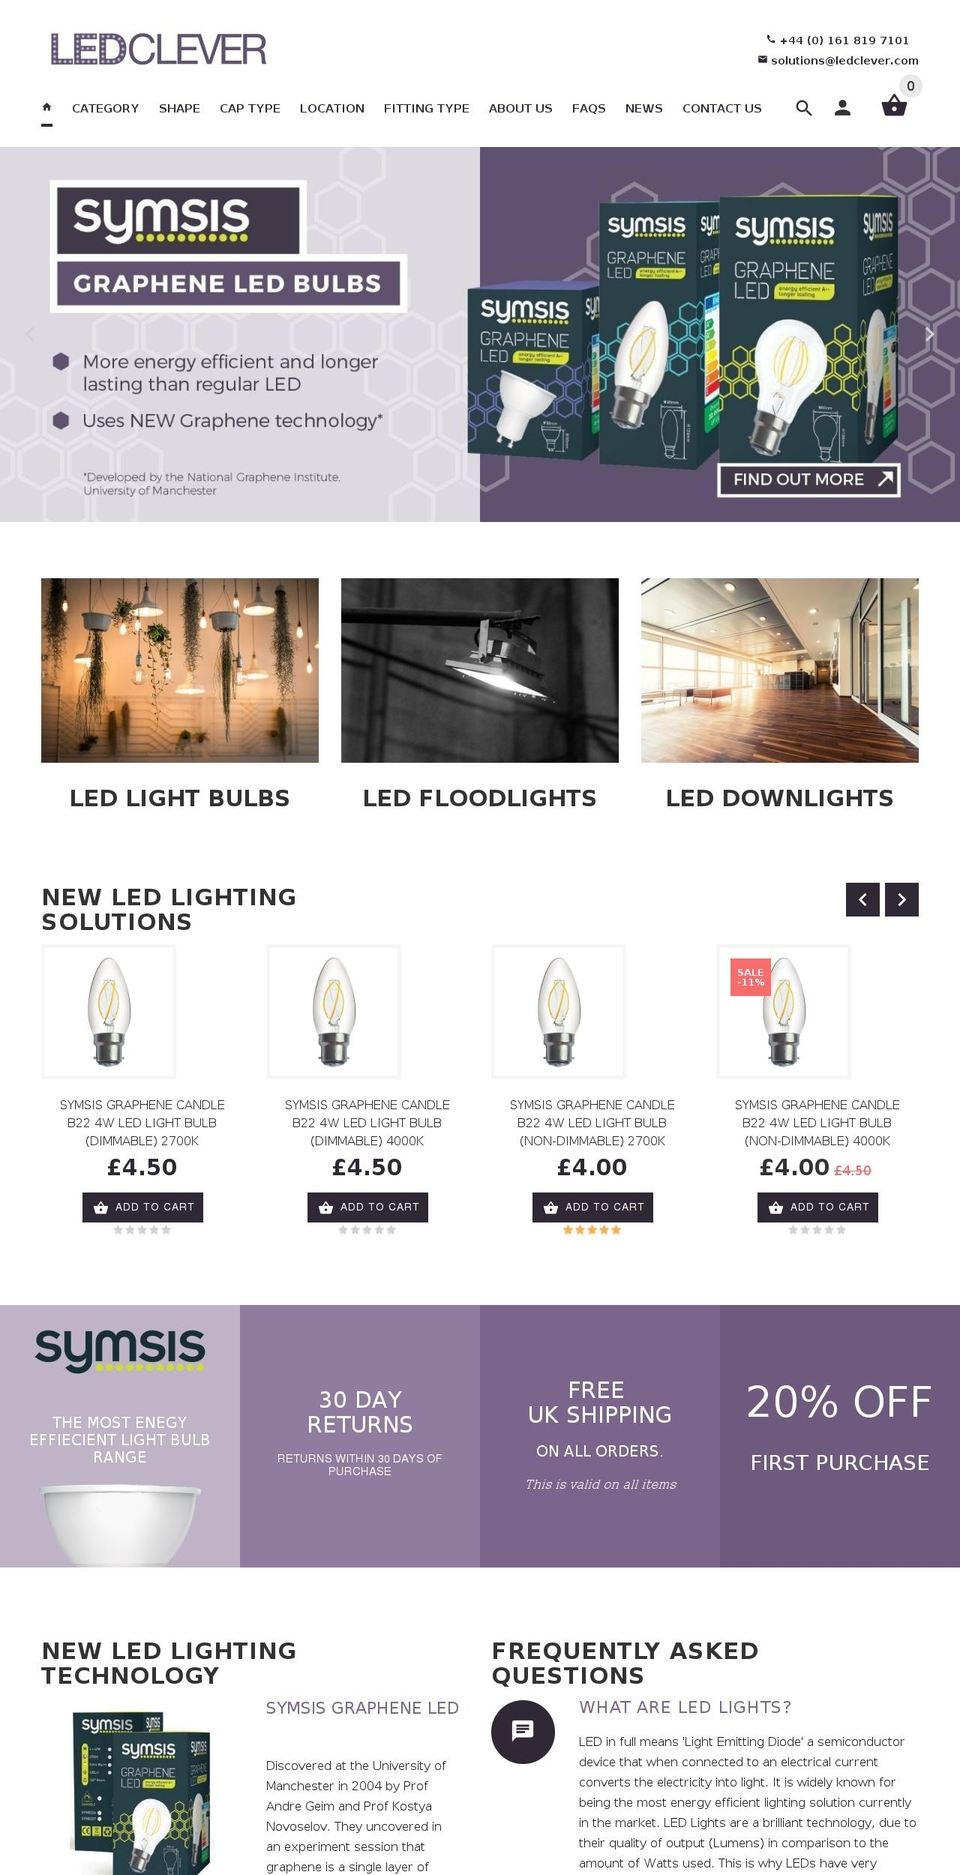 yourstore-v2-1-3 Shopify theme site example ledclever.com